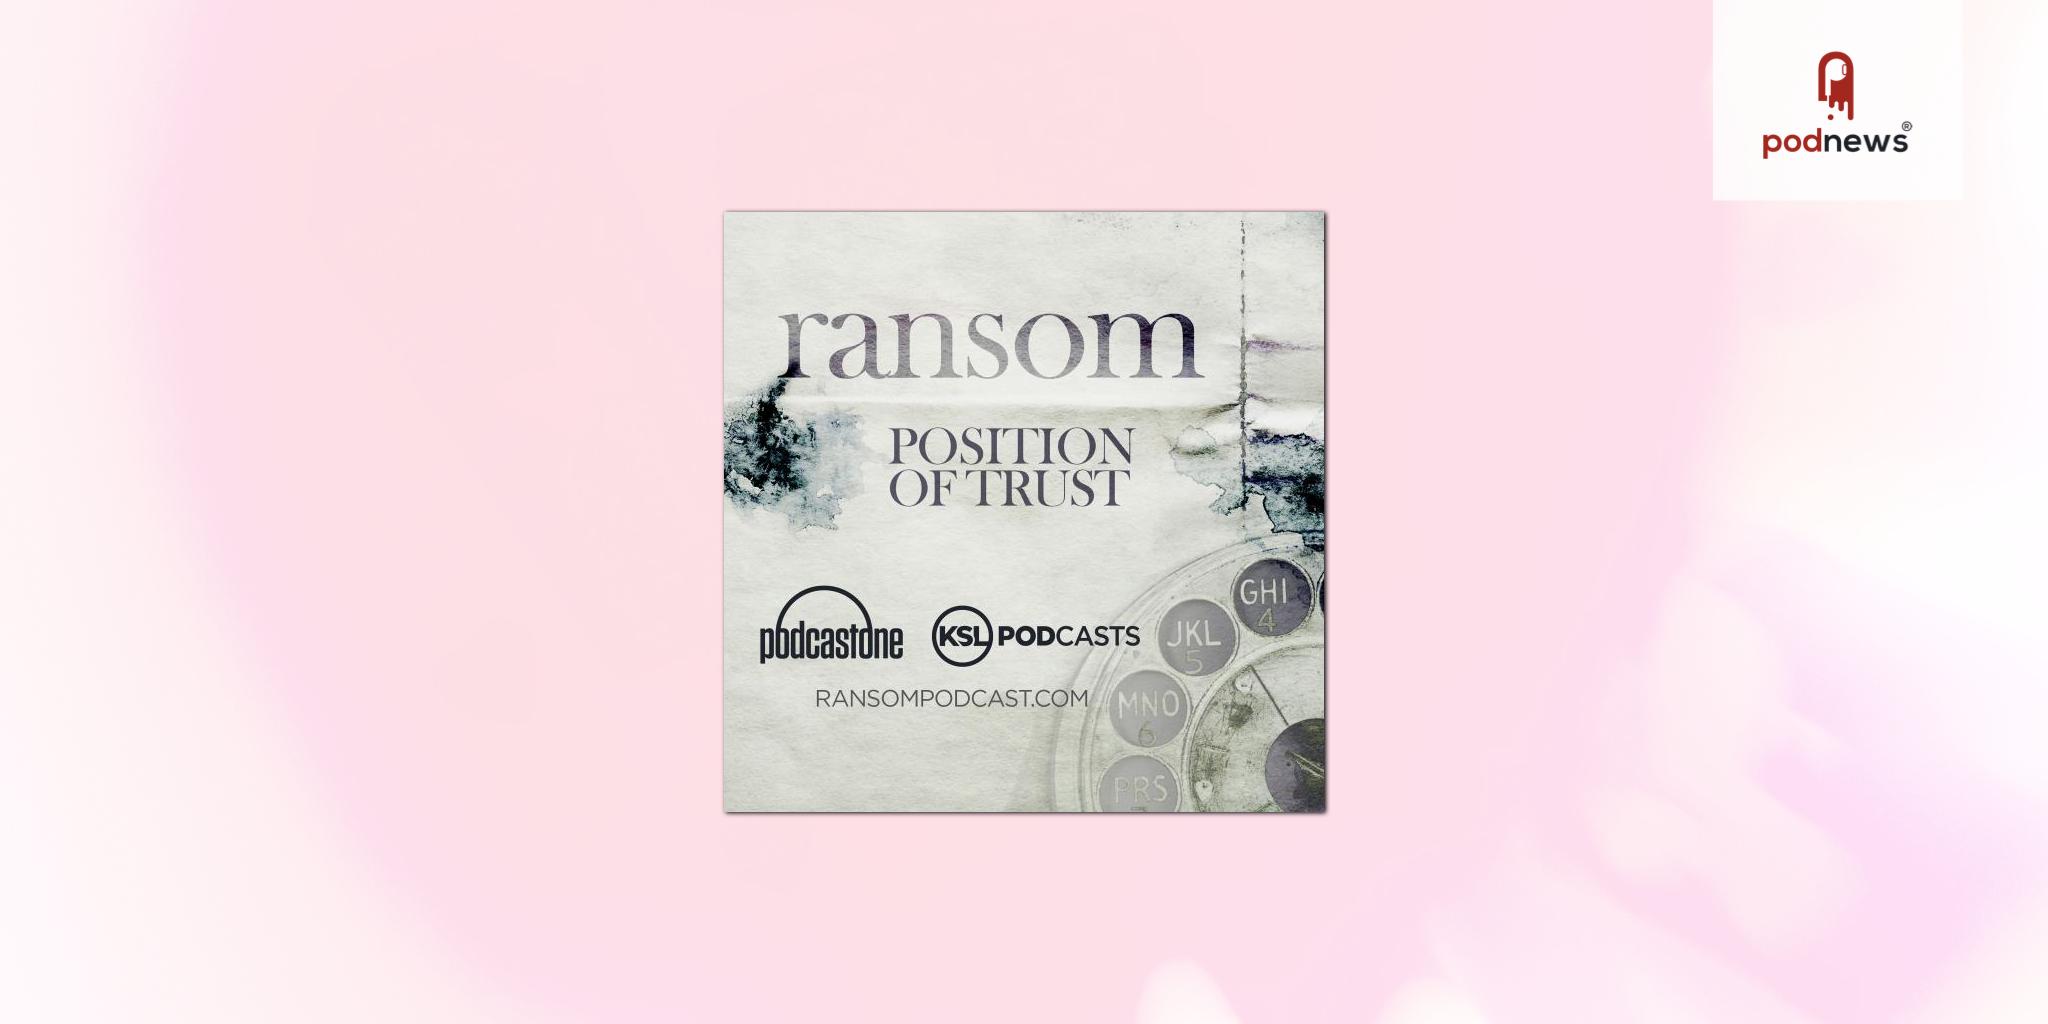 KSL Podcasts and PodcastOne Launch True Crime Series Ransom: Position of Trust